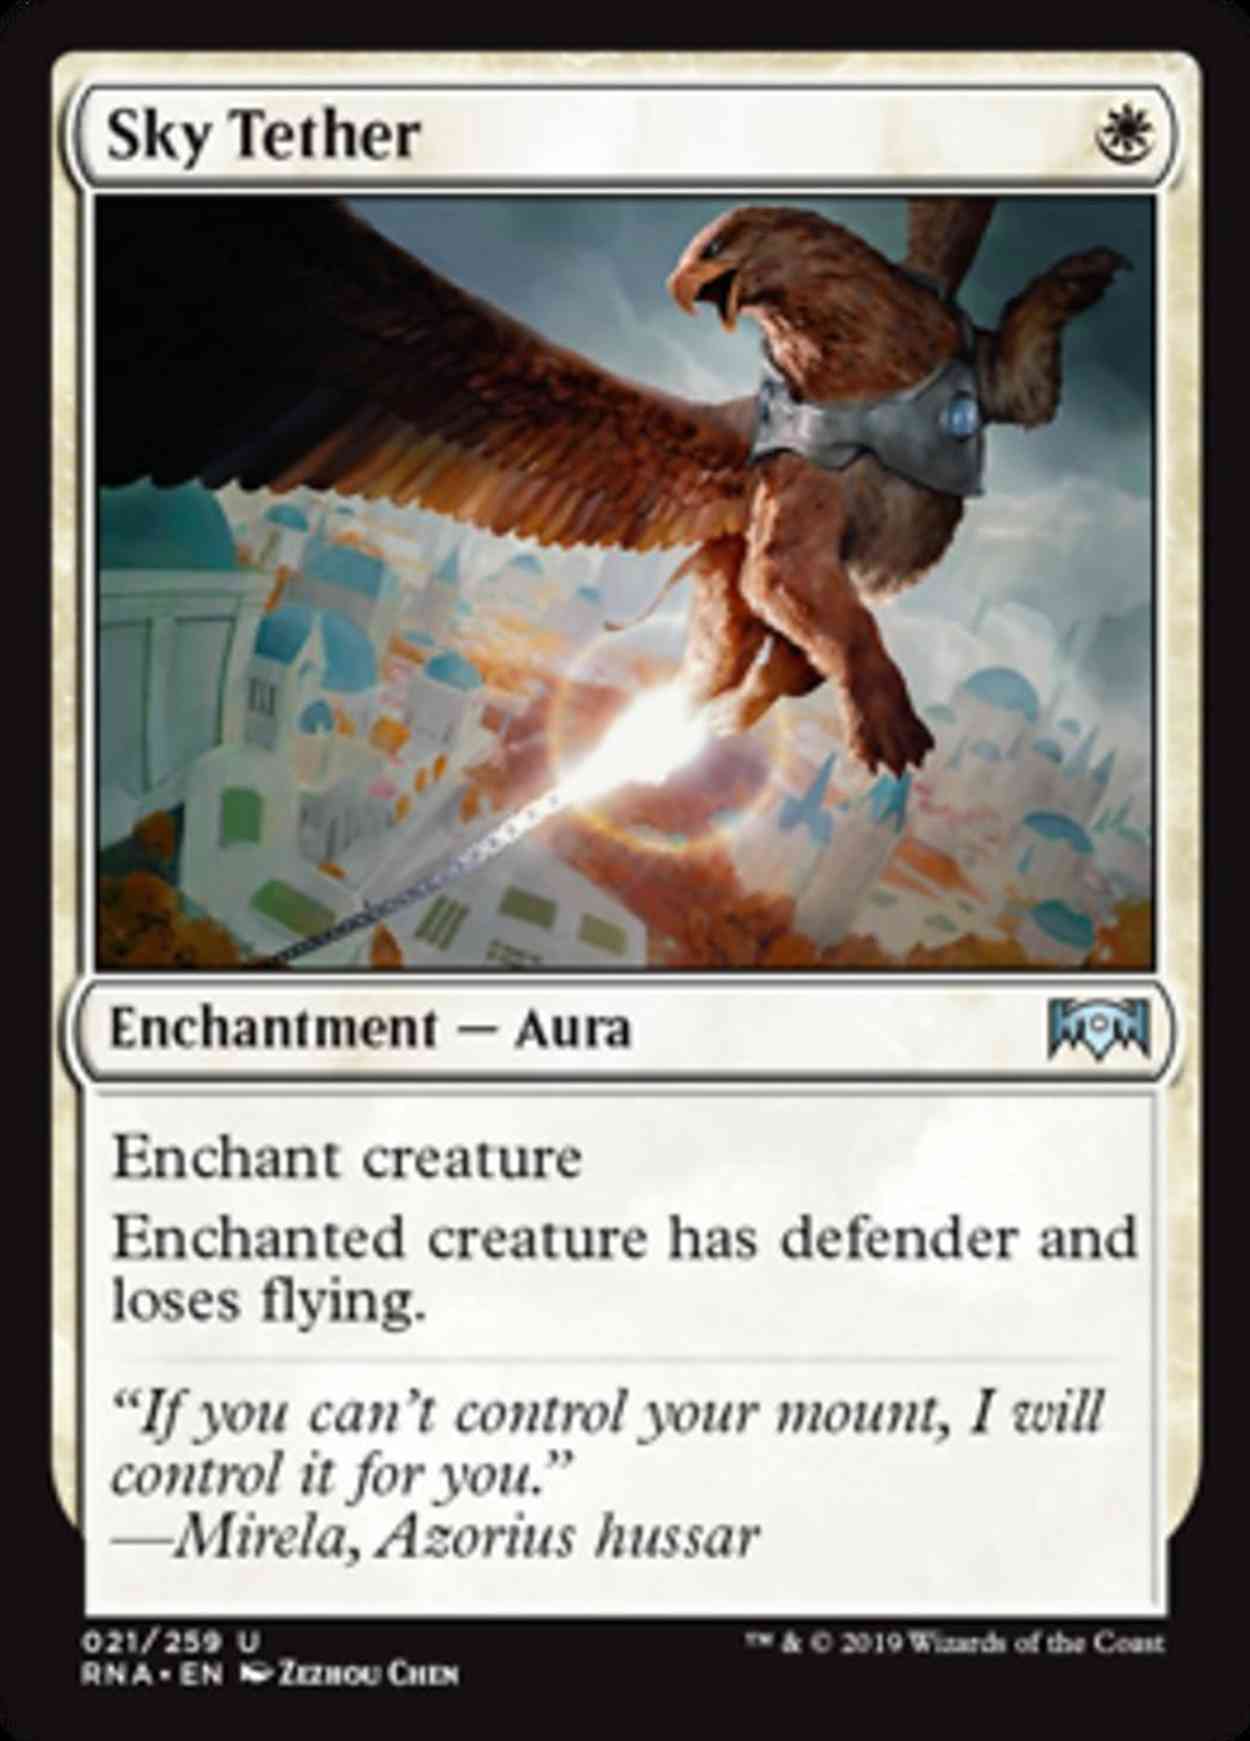 Sky Tether magic card front